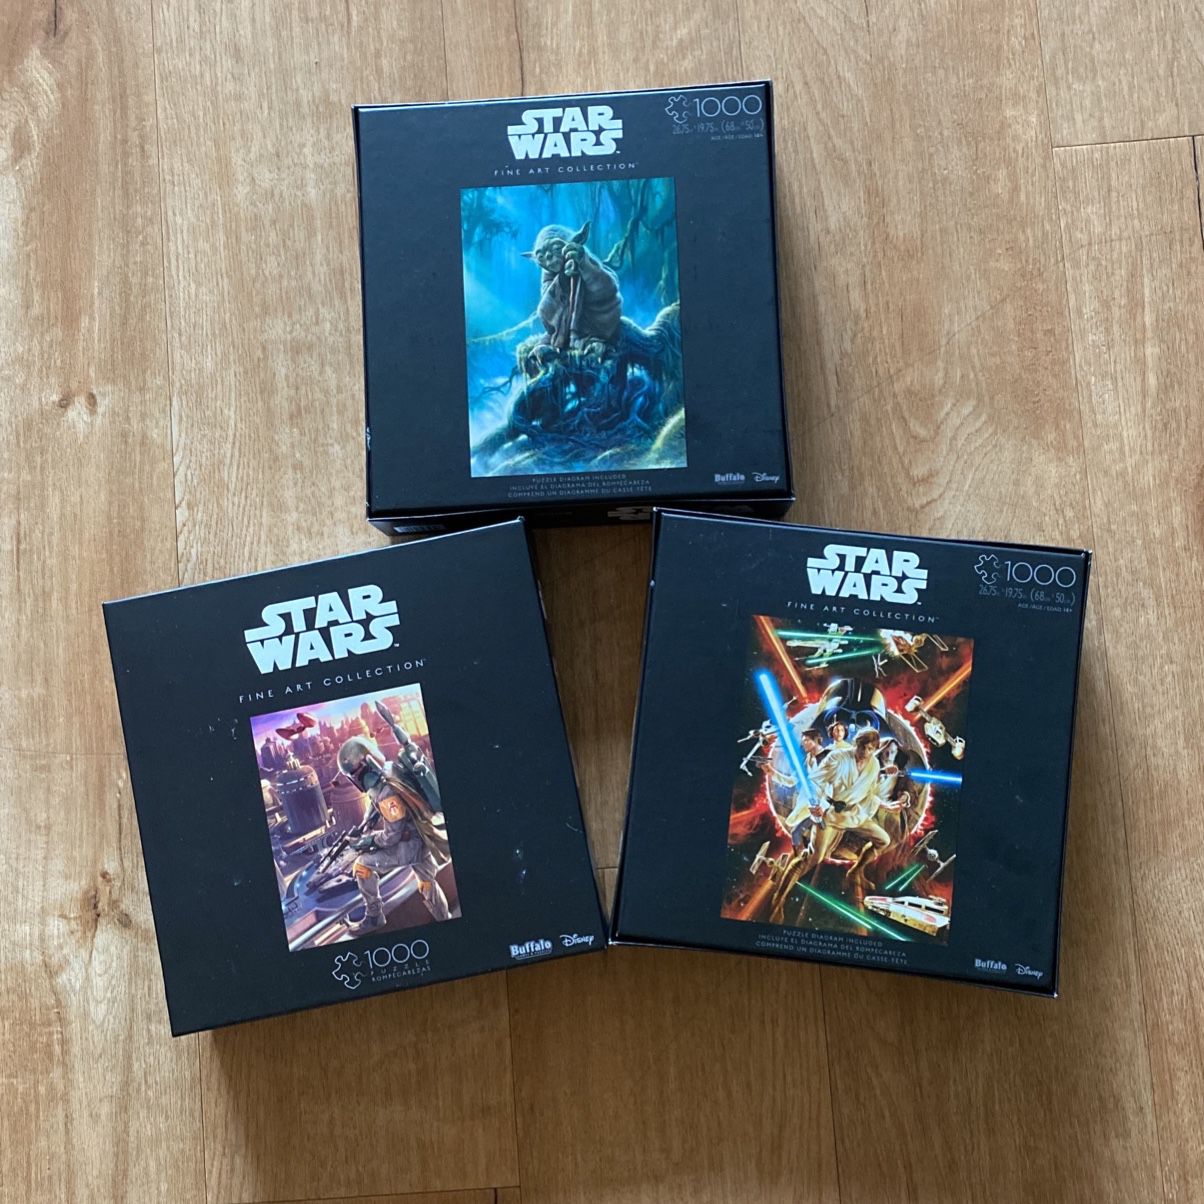 Star Wars 1000 Piece Puzzle for Sale in Lake Elsinore, CA - OfferUp